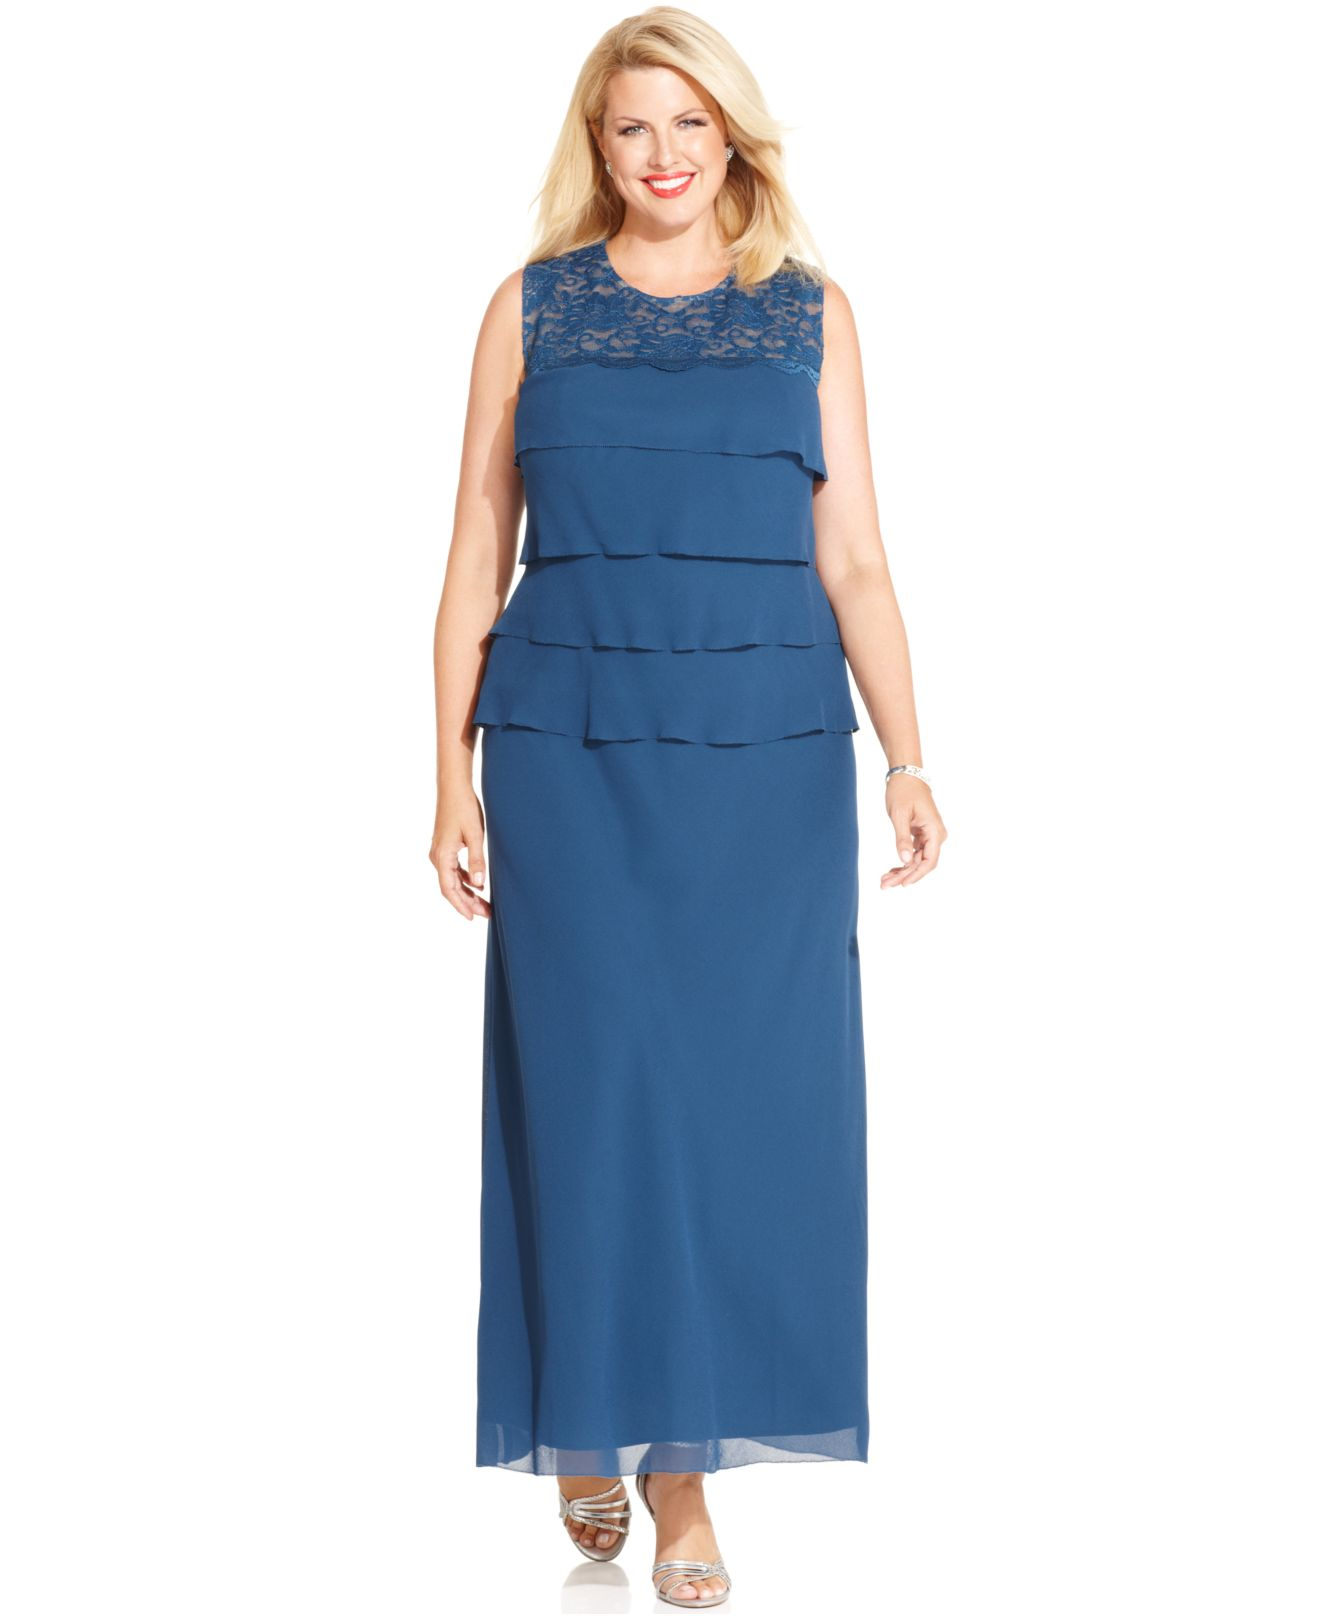 Lyst - Alex Evenings Plus Size Lace Tiered Dress And Jacket in Blue